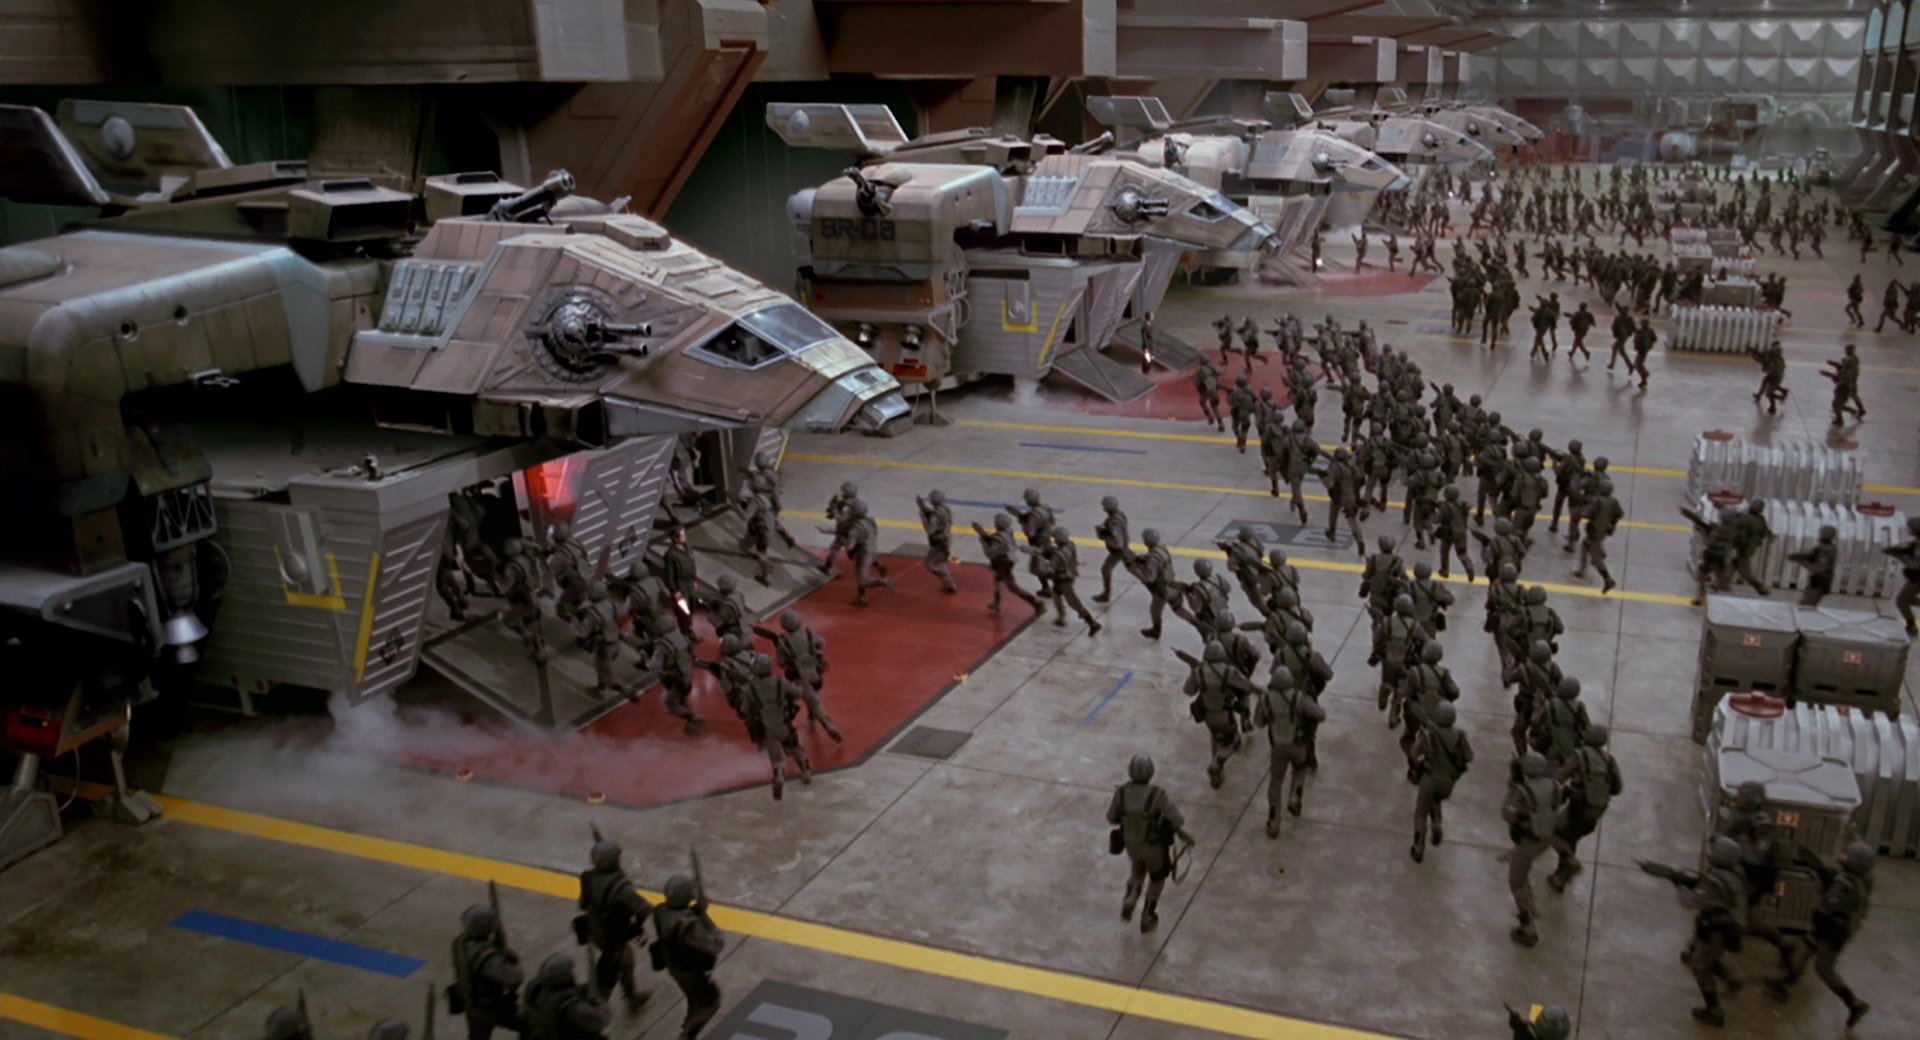 Starship Troopers #9